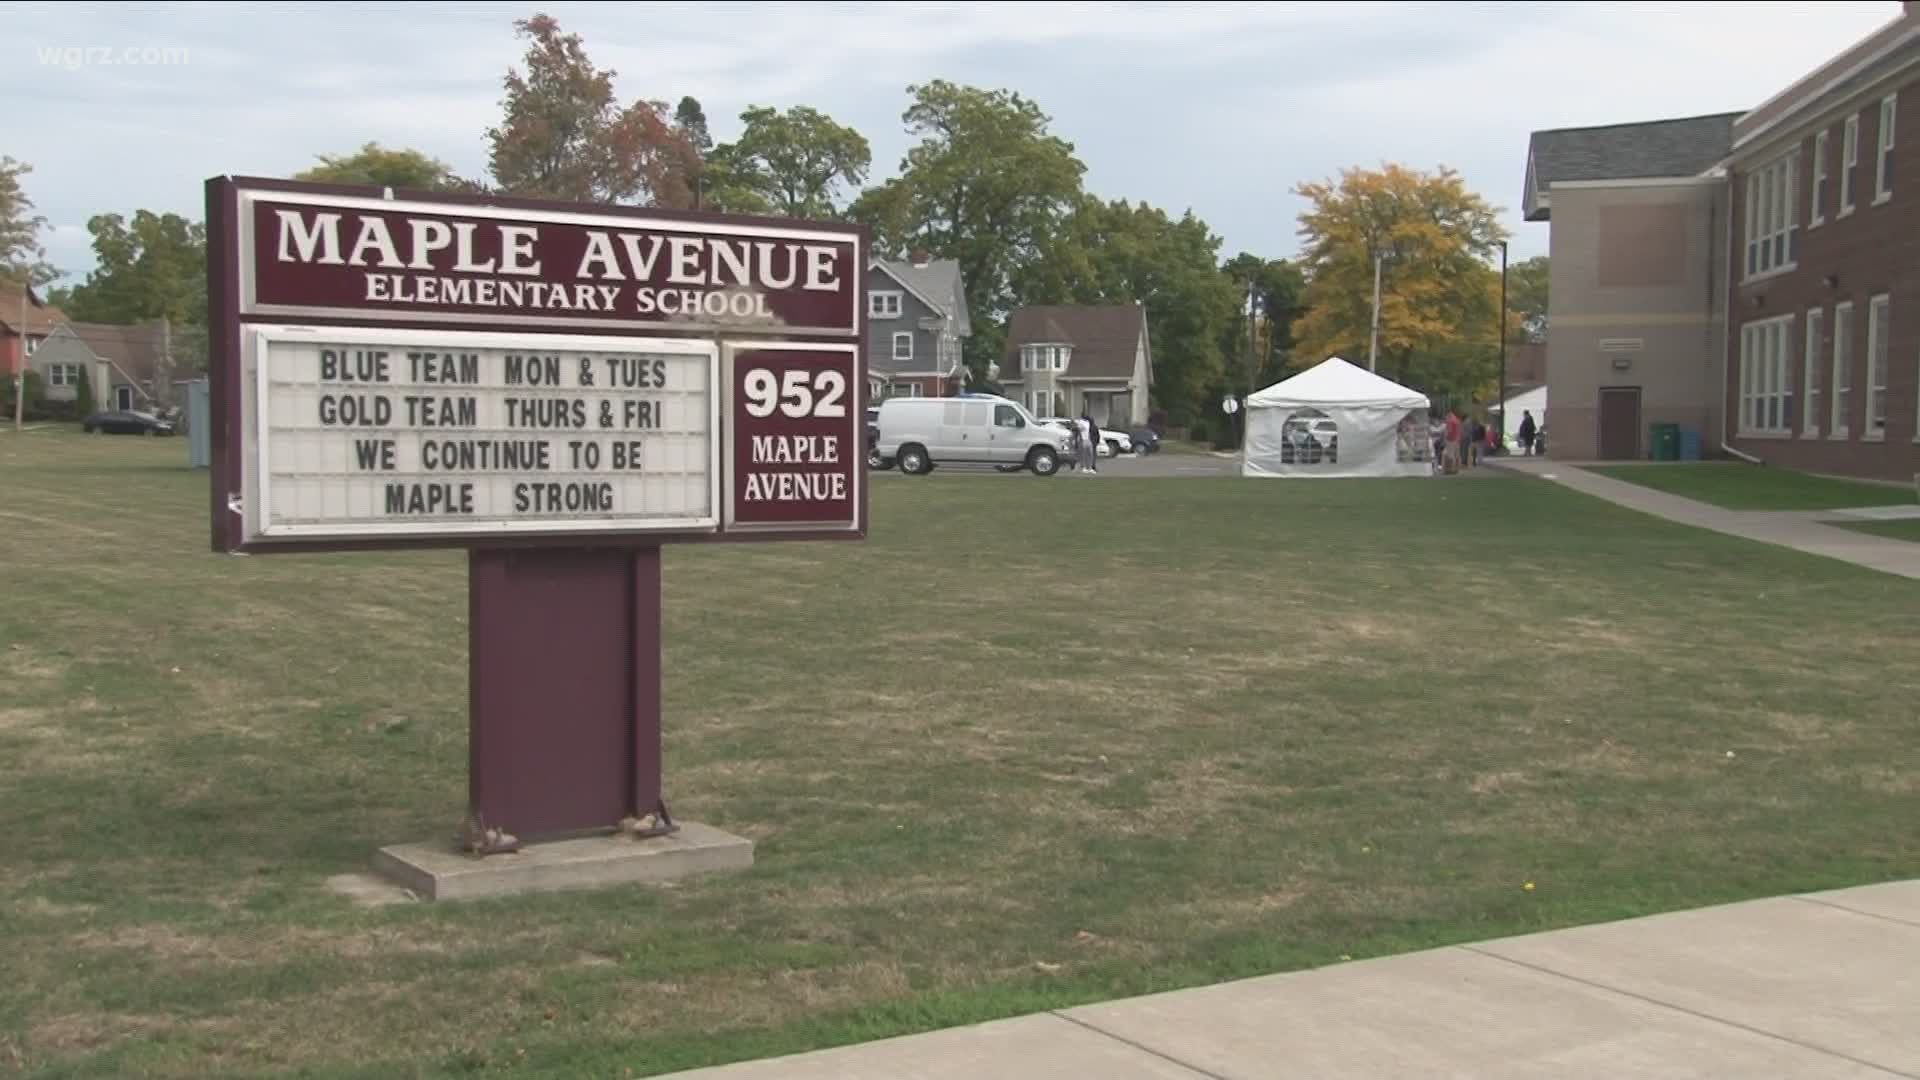 Staff, Students And  Parents At Maple Ave School Tested For Covid